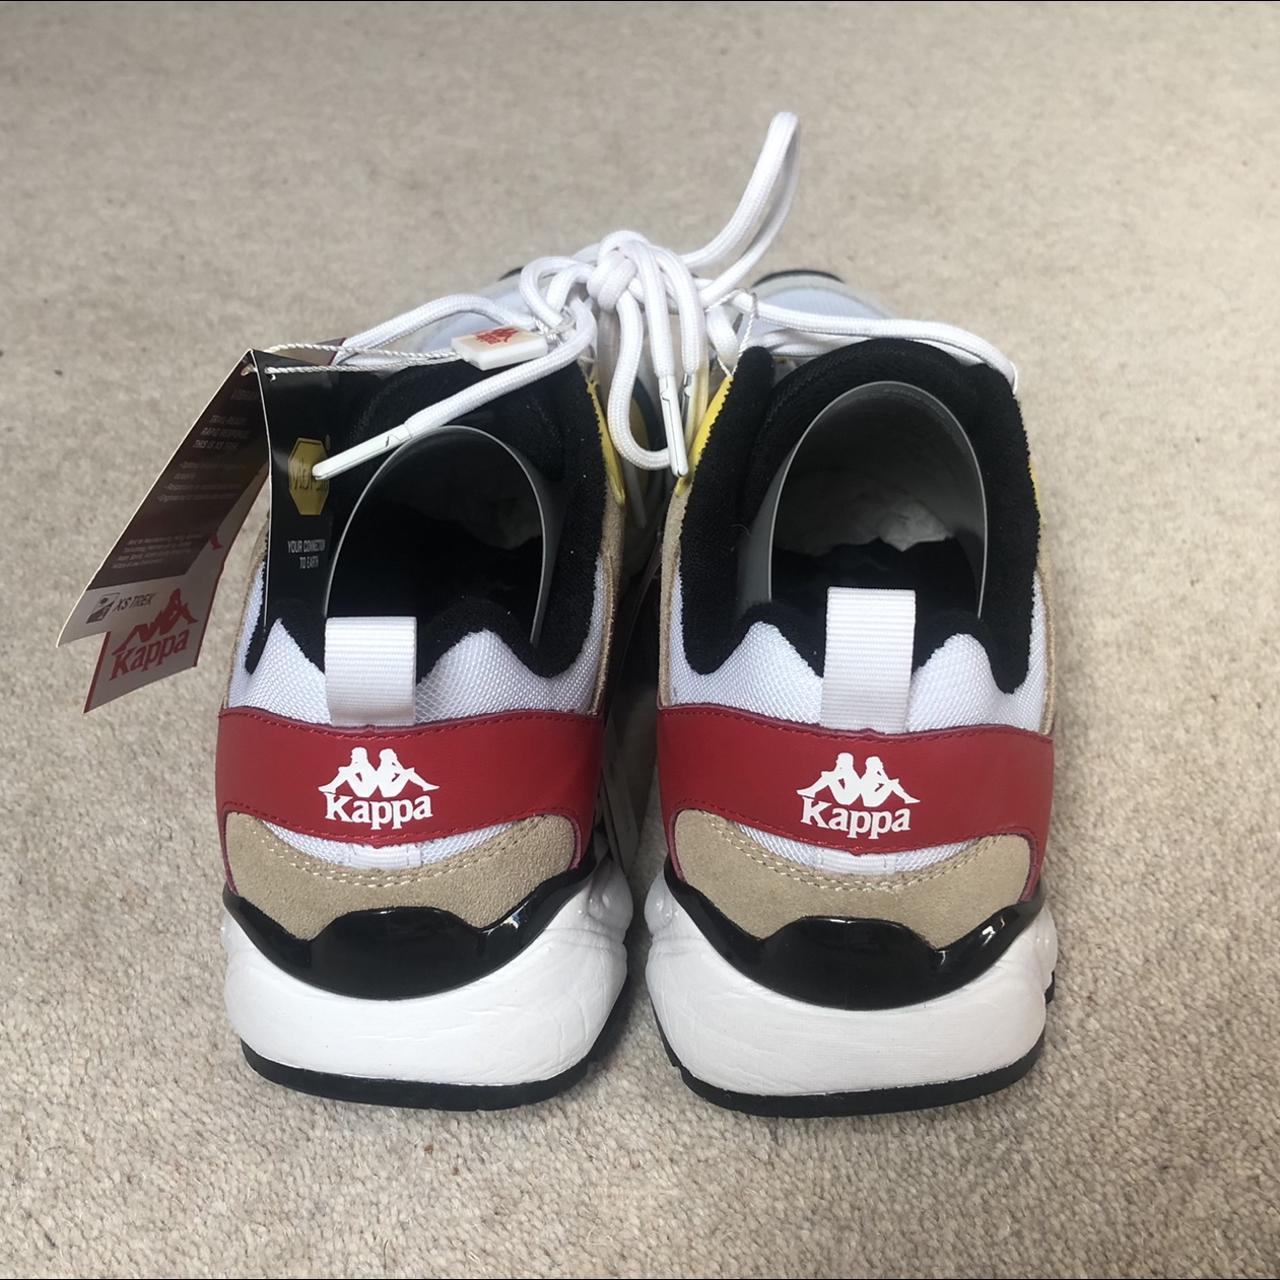 Kappa multi new colour Brand trainers/shoes with... Depop 